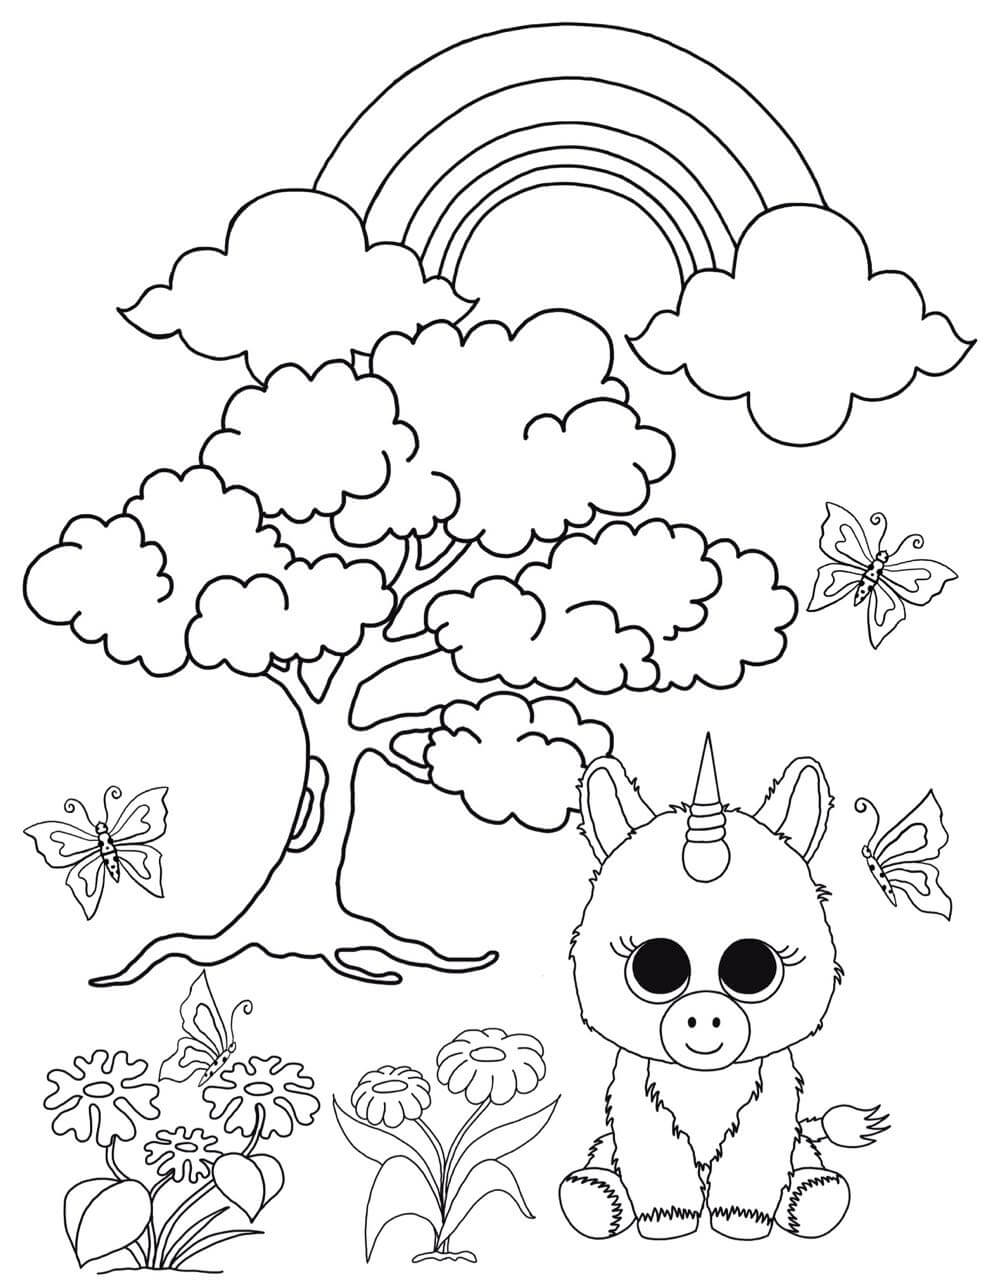 Unicorn Beanie Boo Coloring Pages